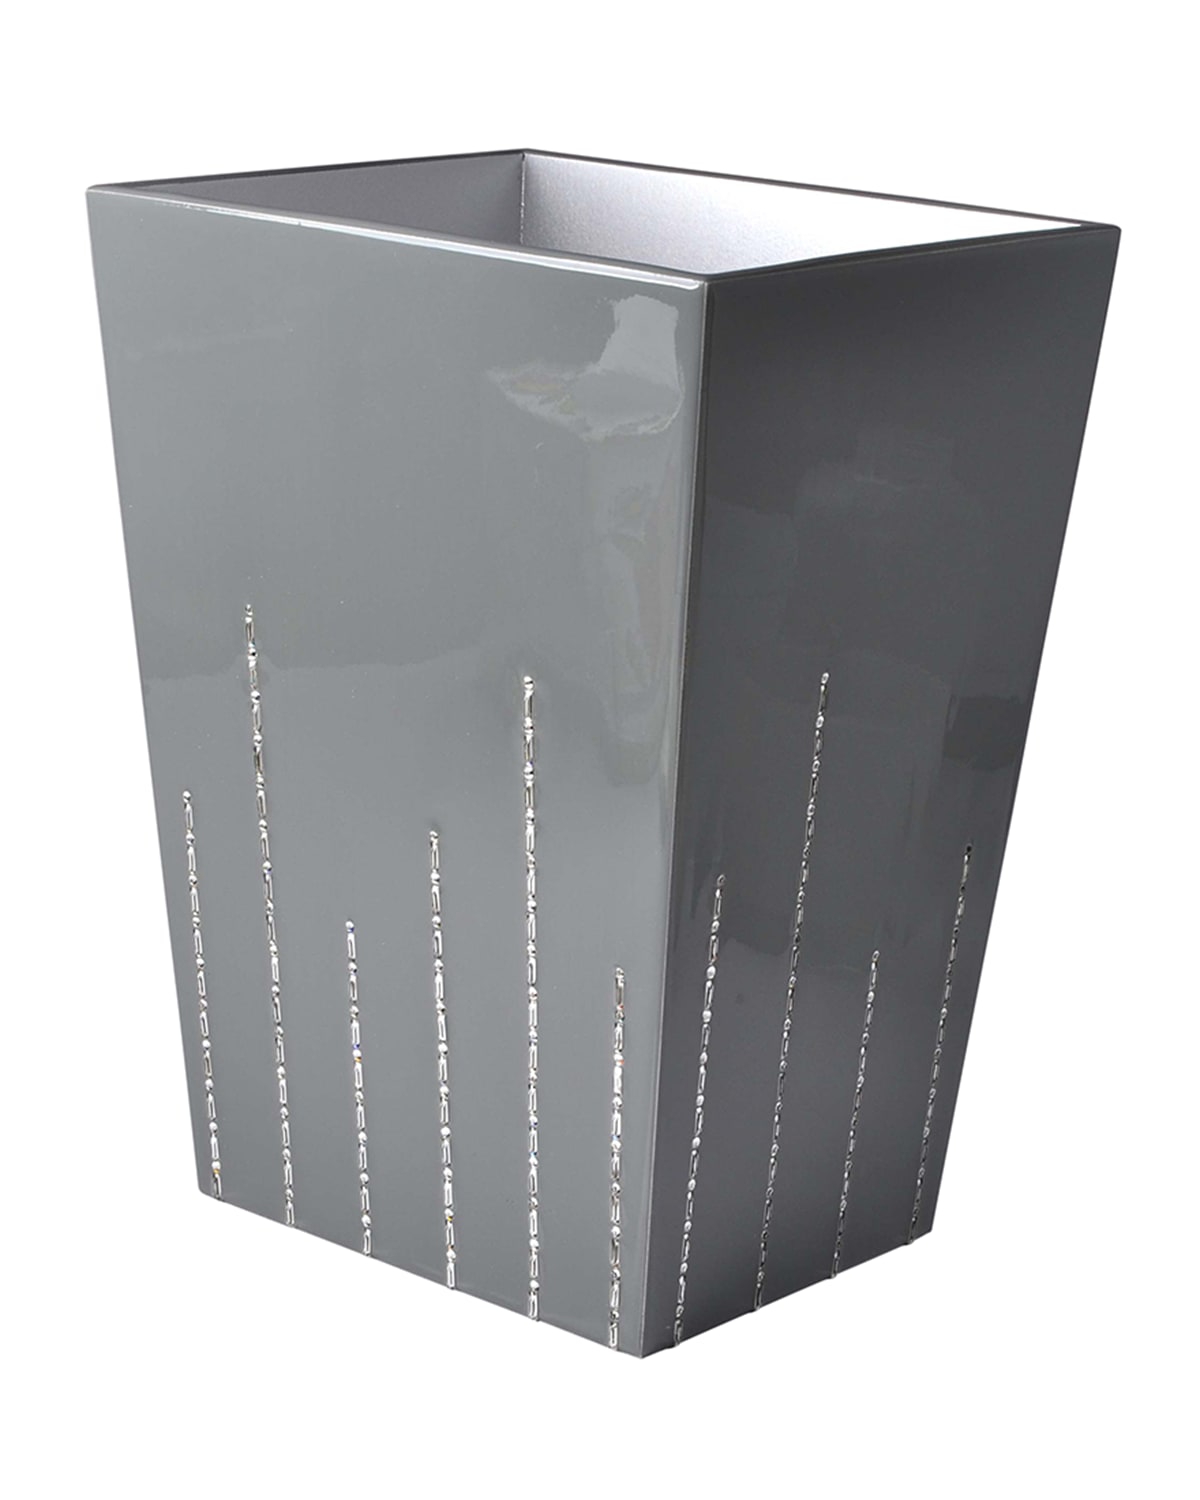 Mike & Ally Deauville Wastebasket With Swarovski Crystals In Gray